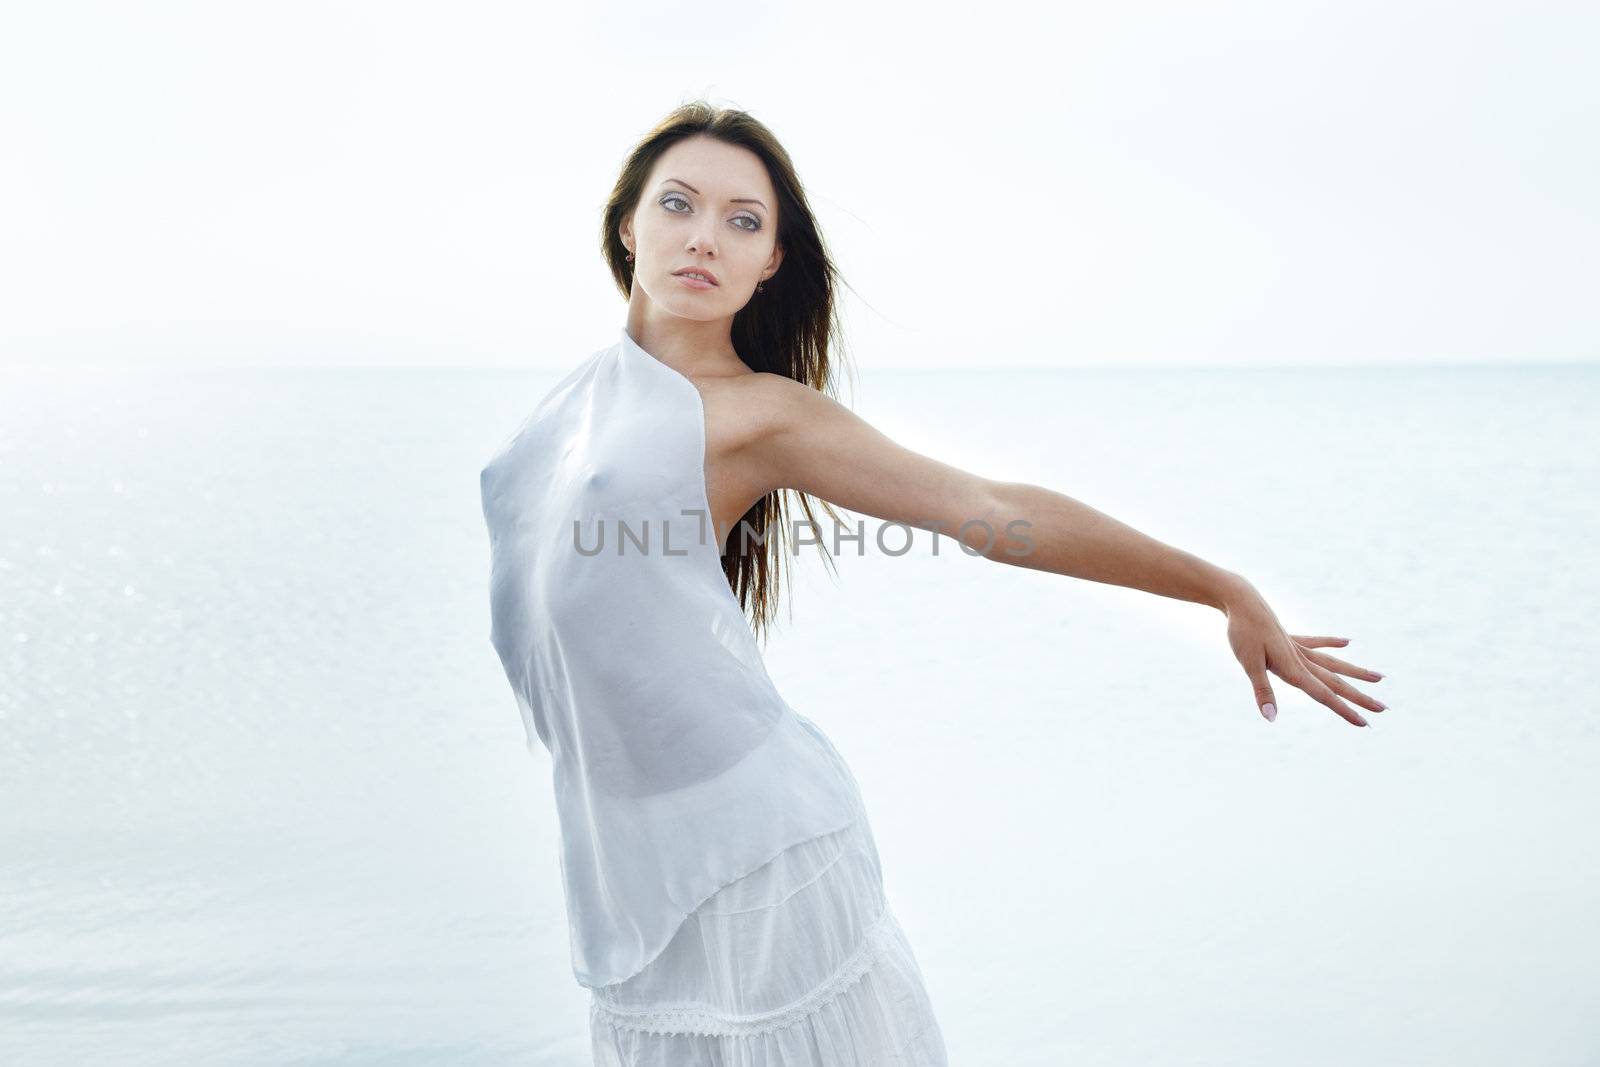 Perfect lady outdoors posing against the sea background